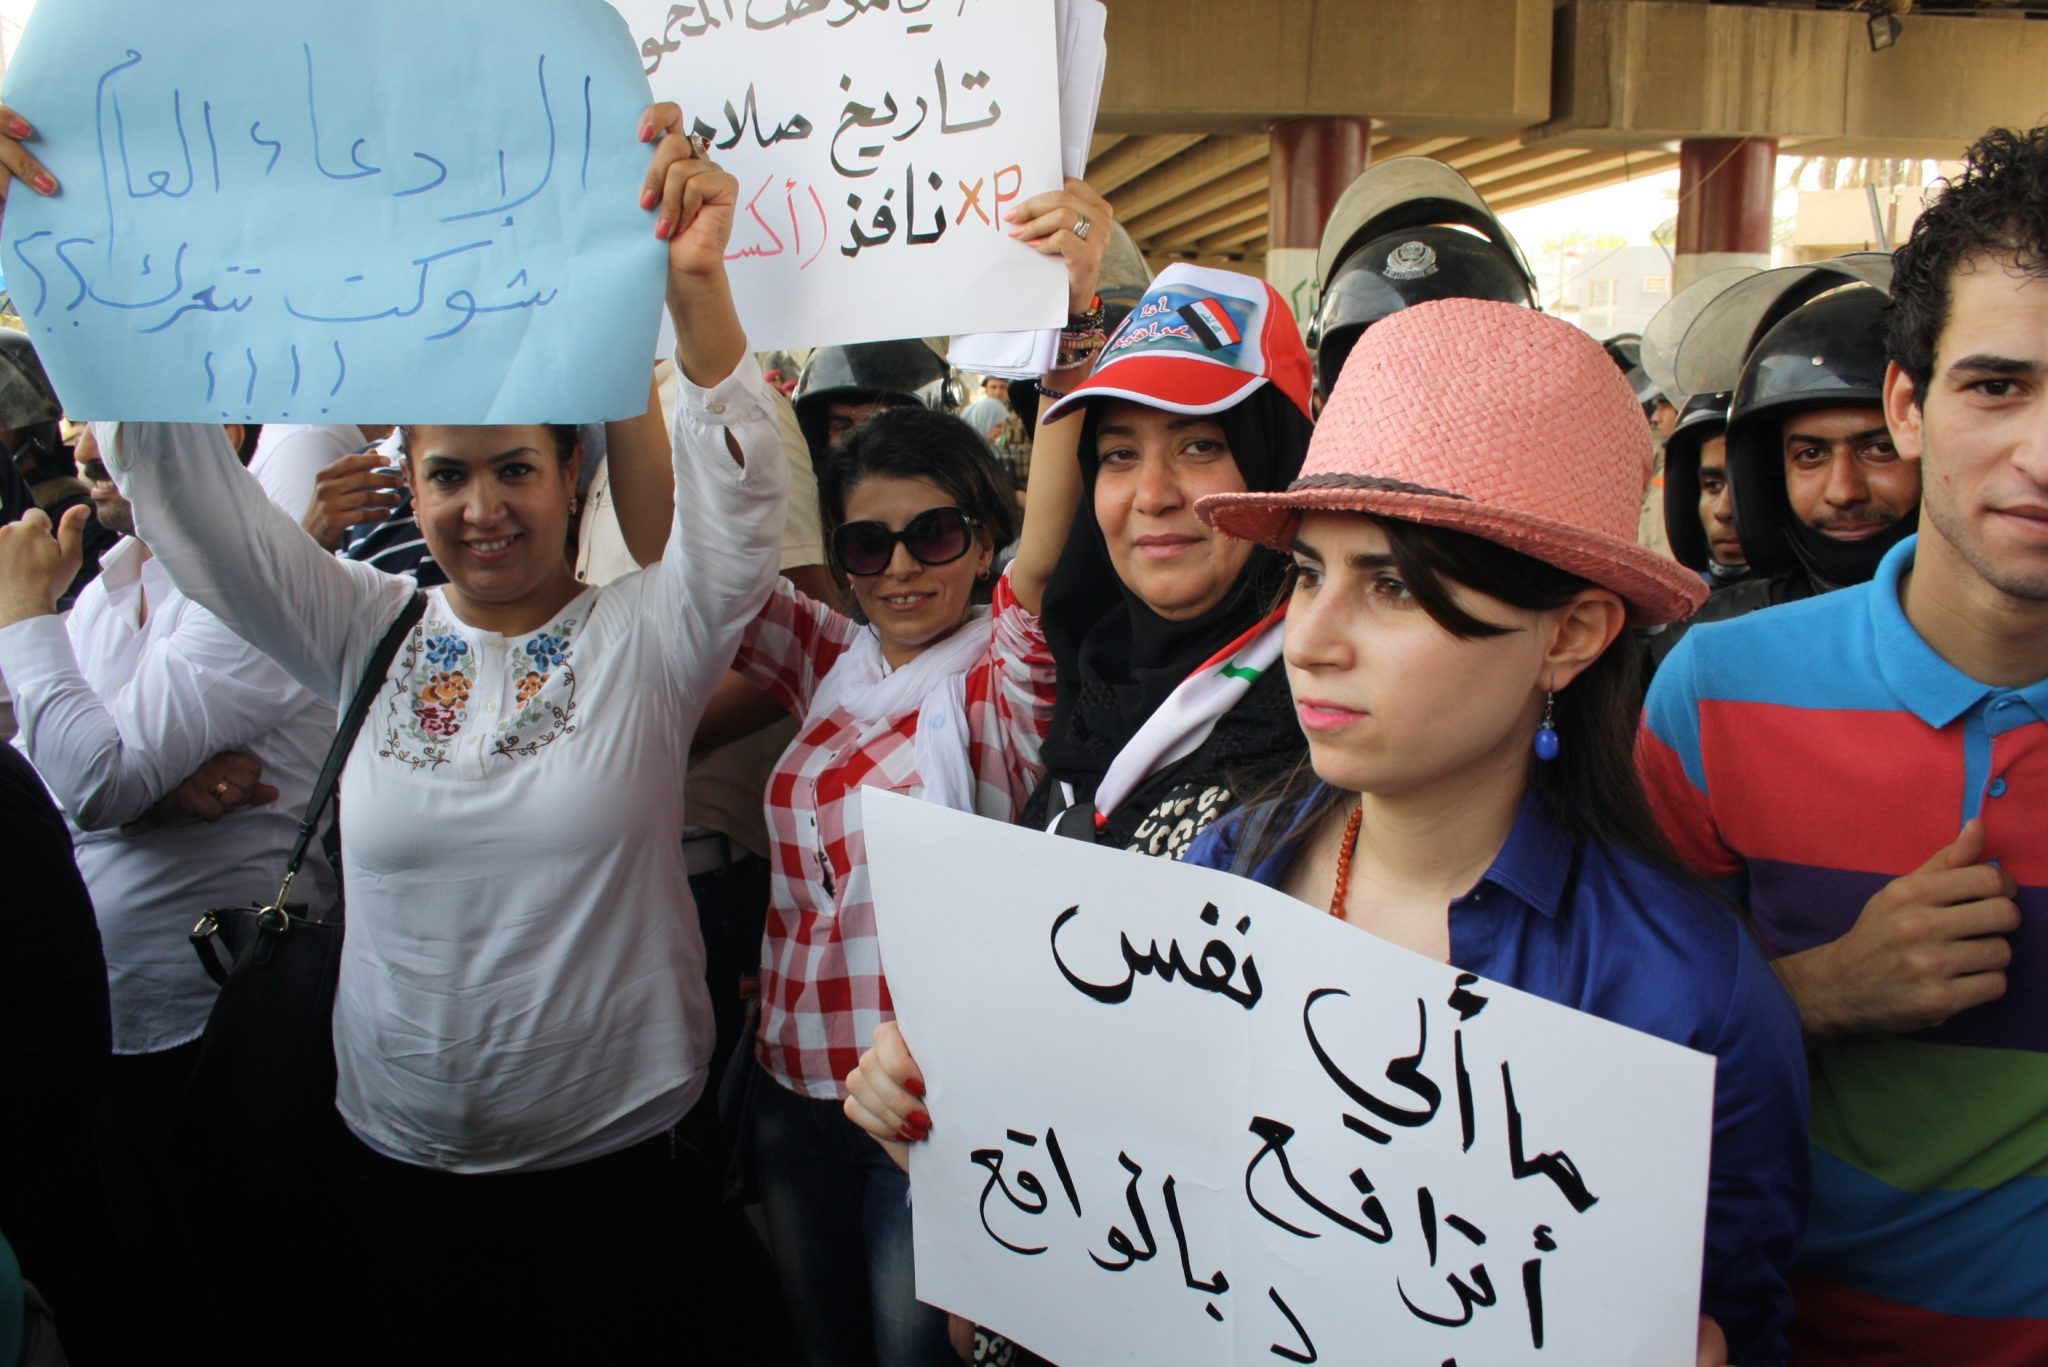 Demonstrations in Bagdad against the Iraqi government in the summer of 2015, calling for a reform of the judiciary and less corruption. Photo: Iraqi Women's League